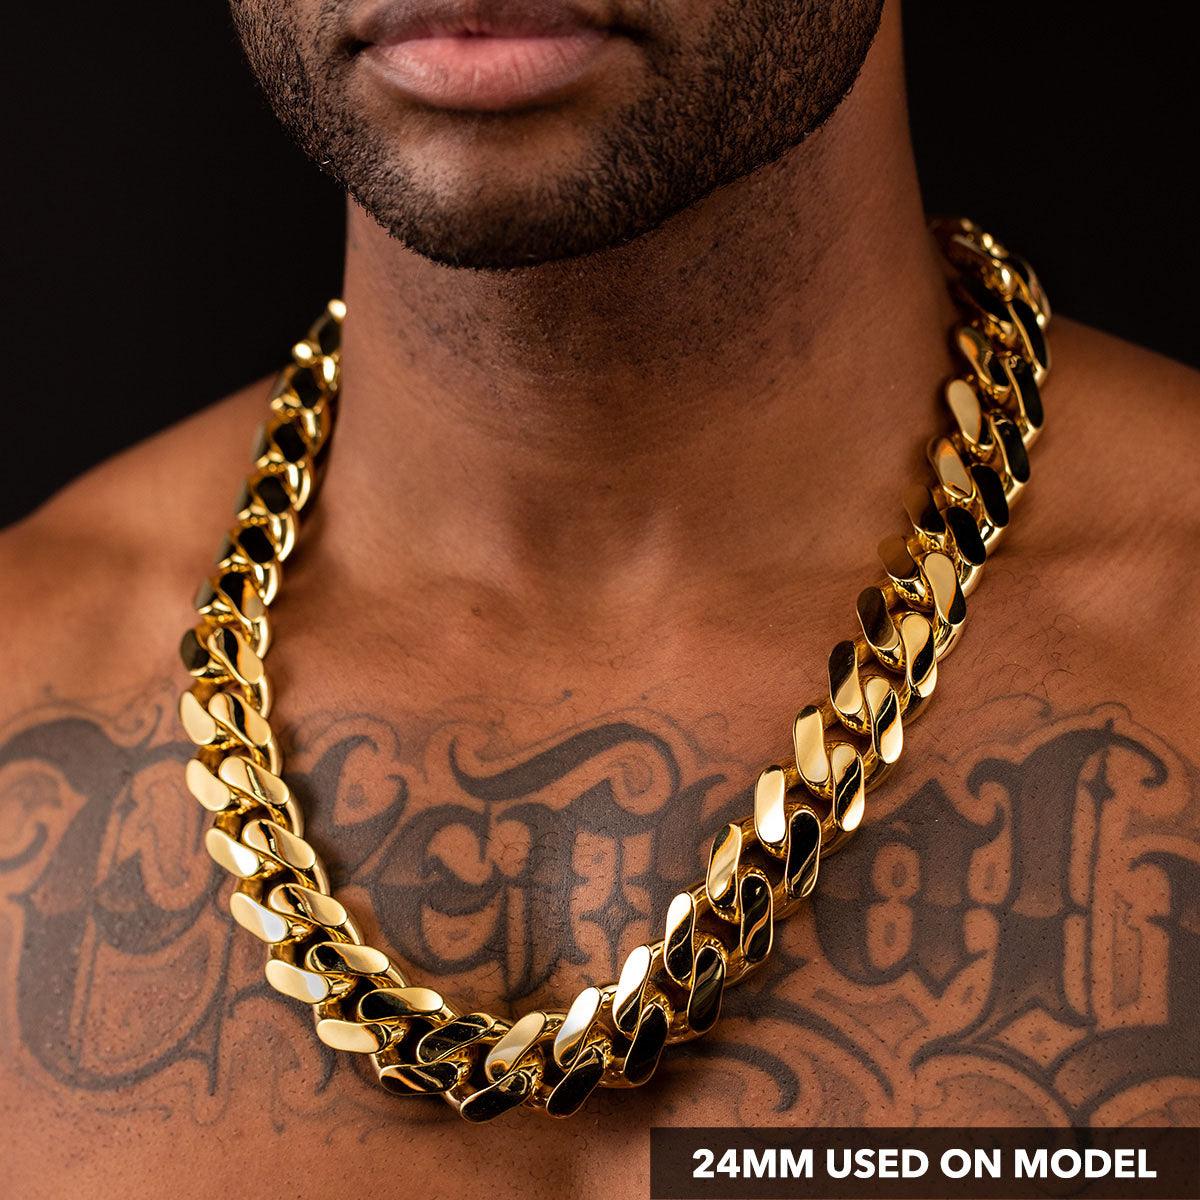 The Most Popular Men's Gold Chain Necklaces Among Celebrities and Influencers - bayamjewelry